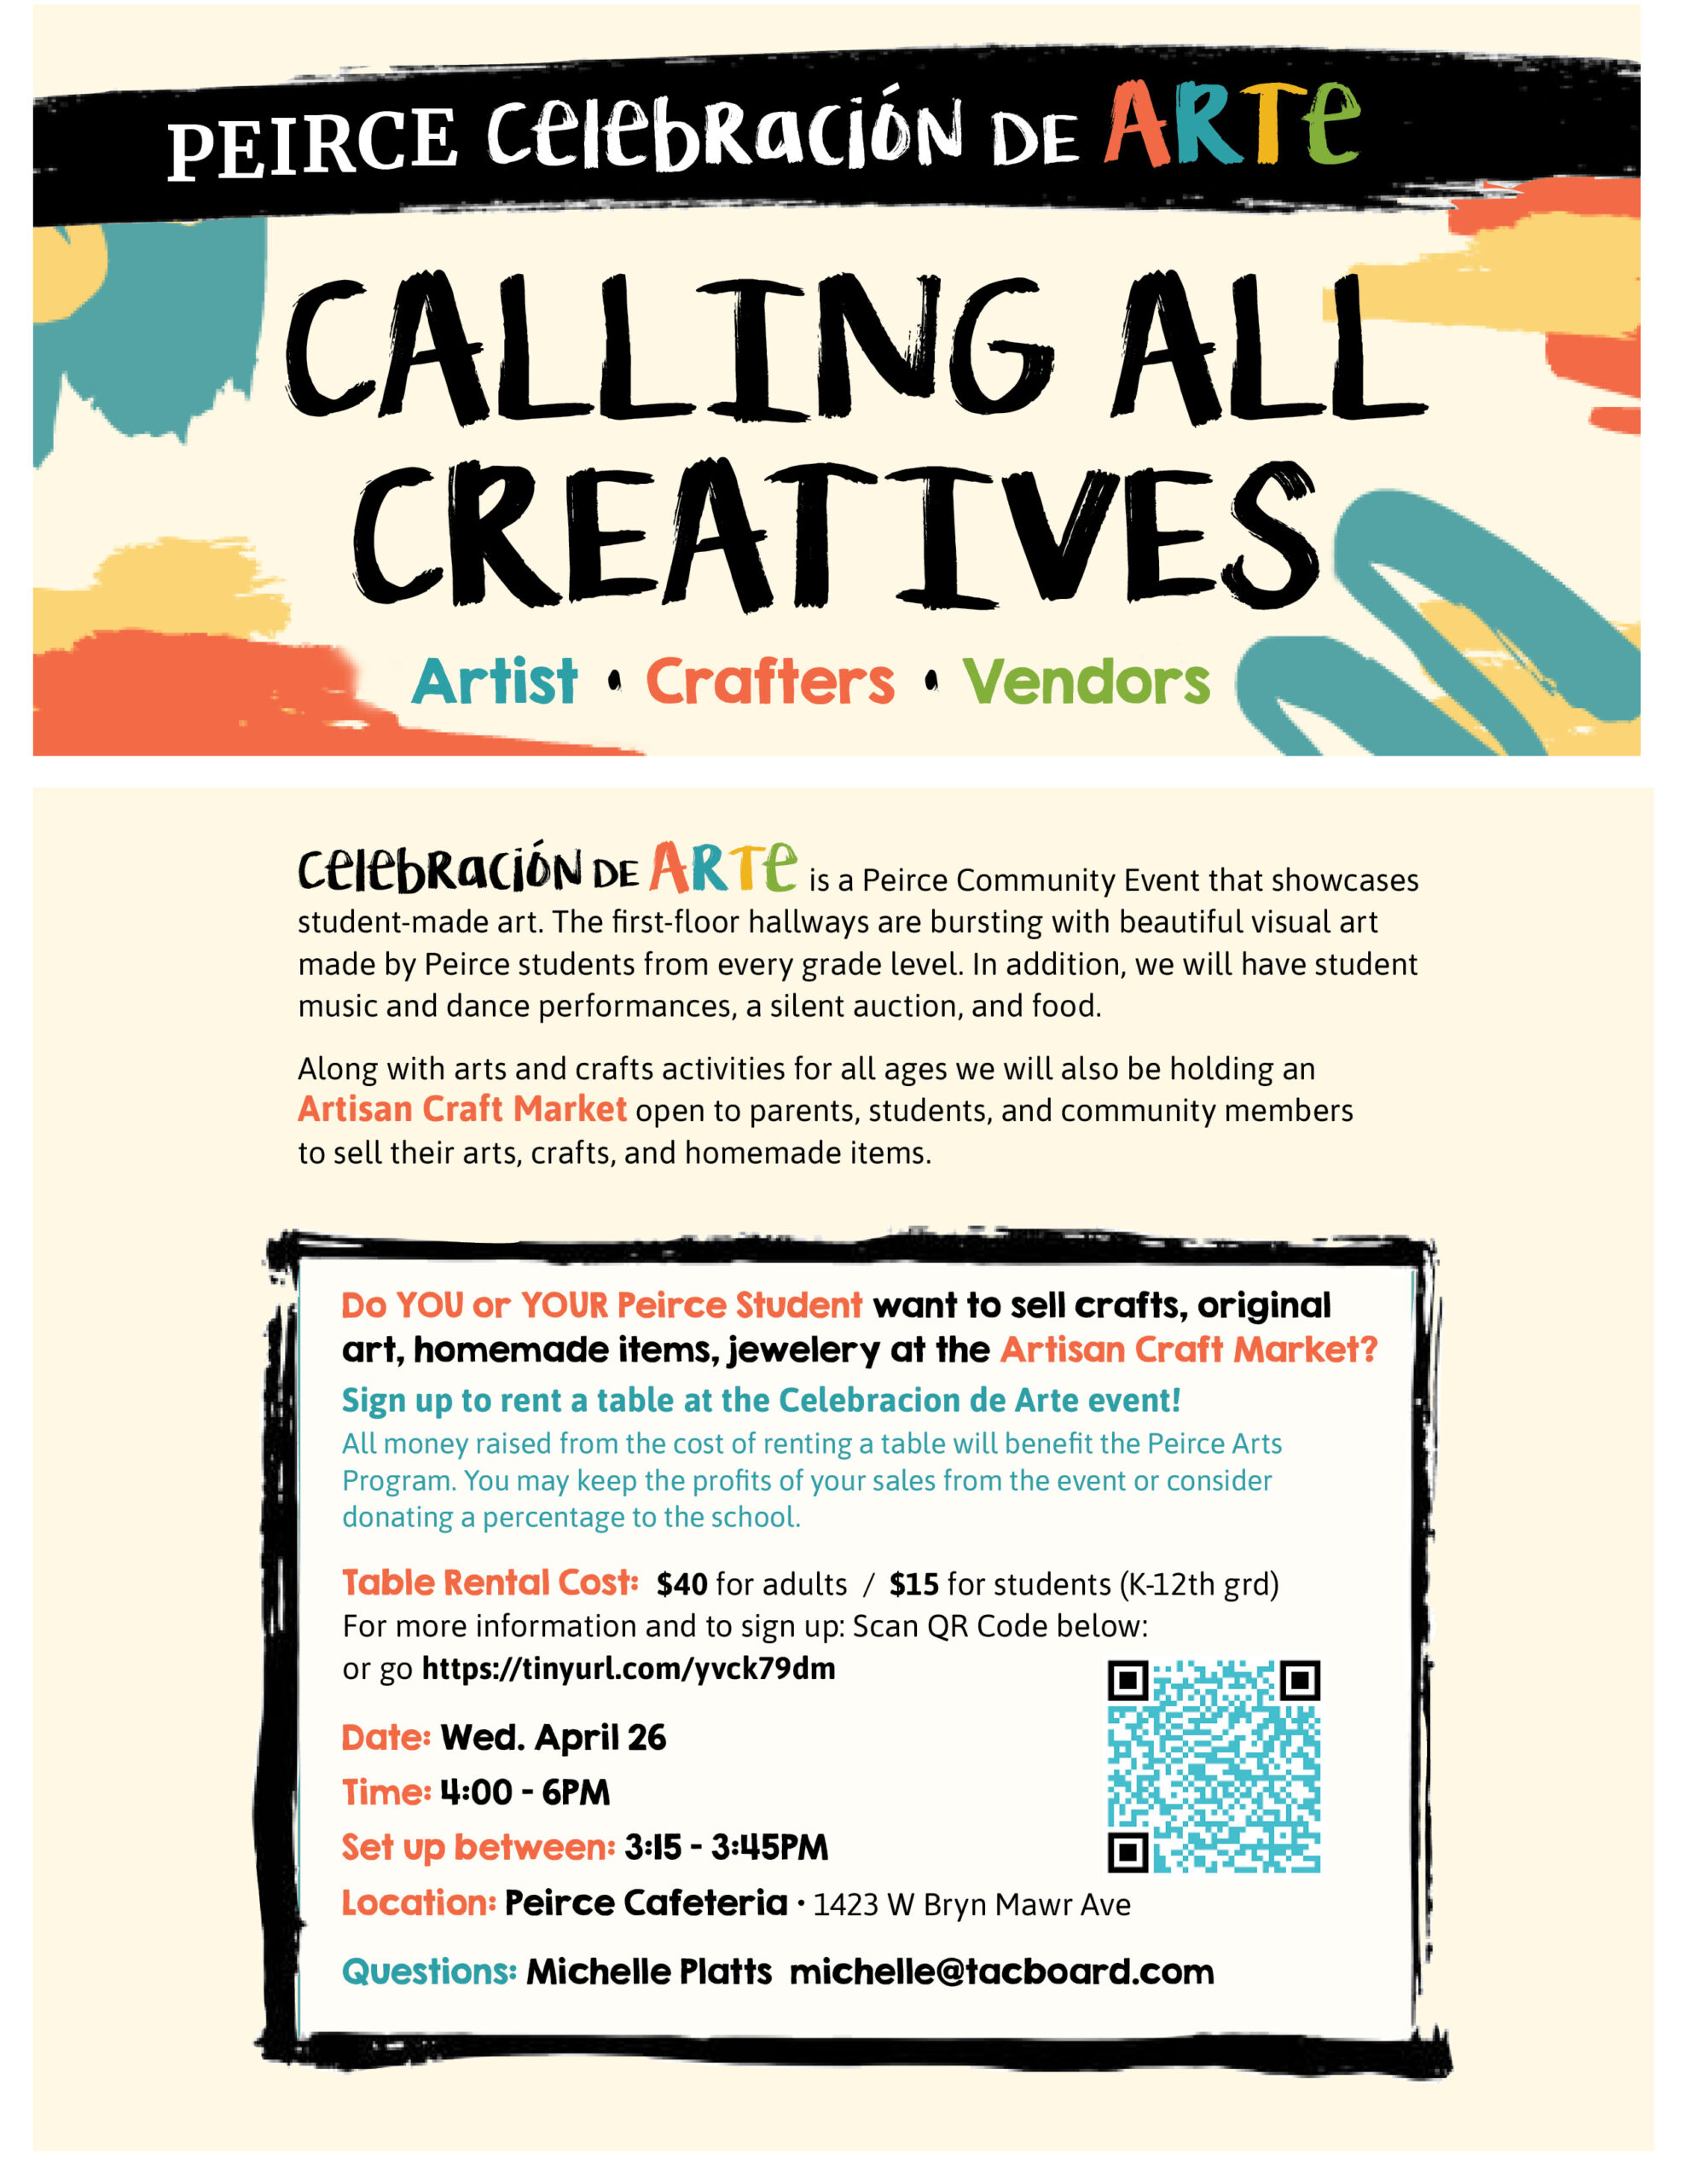 Calling all Creatives- Artists, Crafters, Vendors